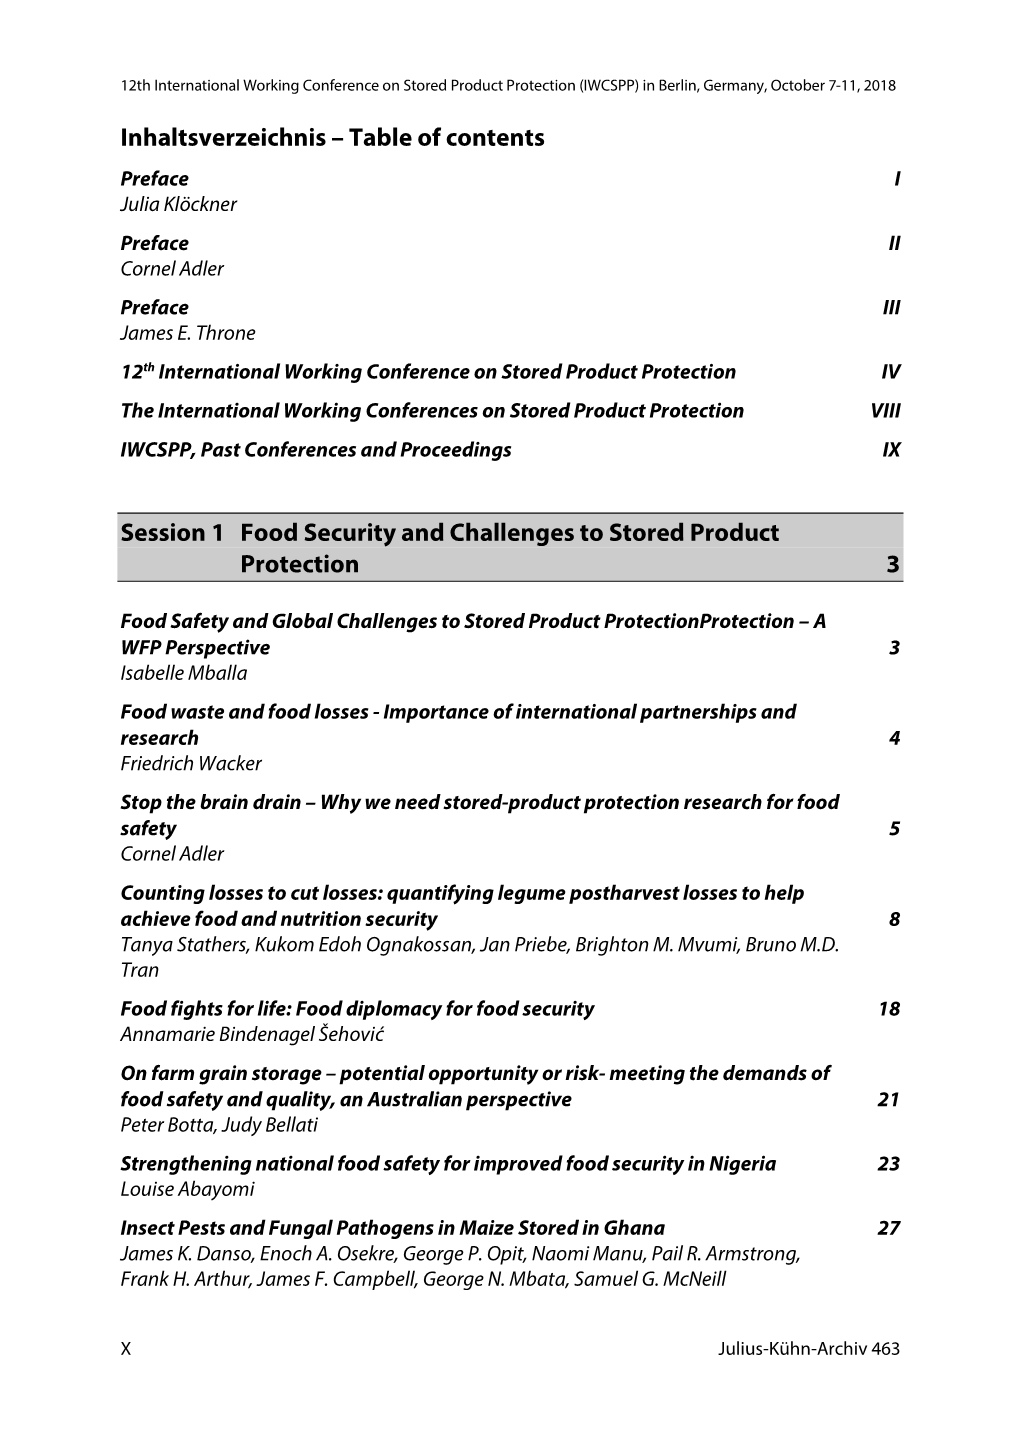 Table of Contents Session 1 Food Security and Challenges to Stored